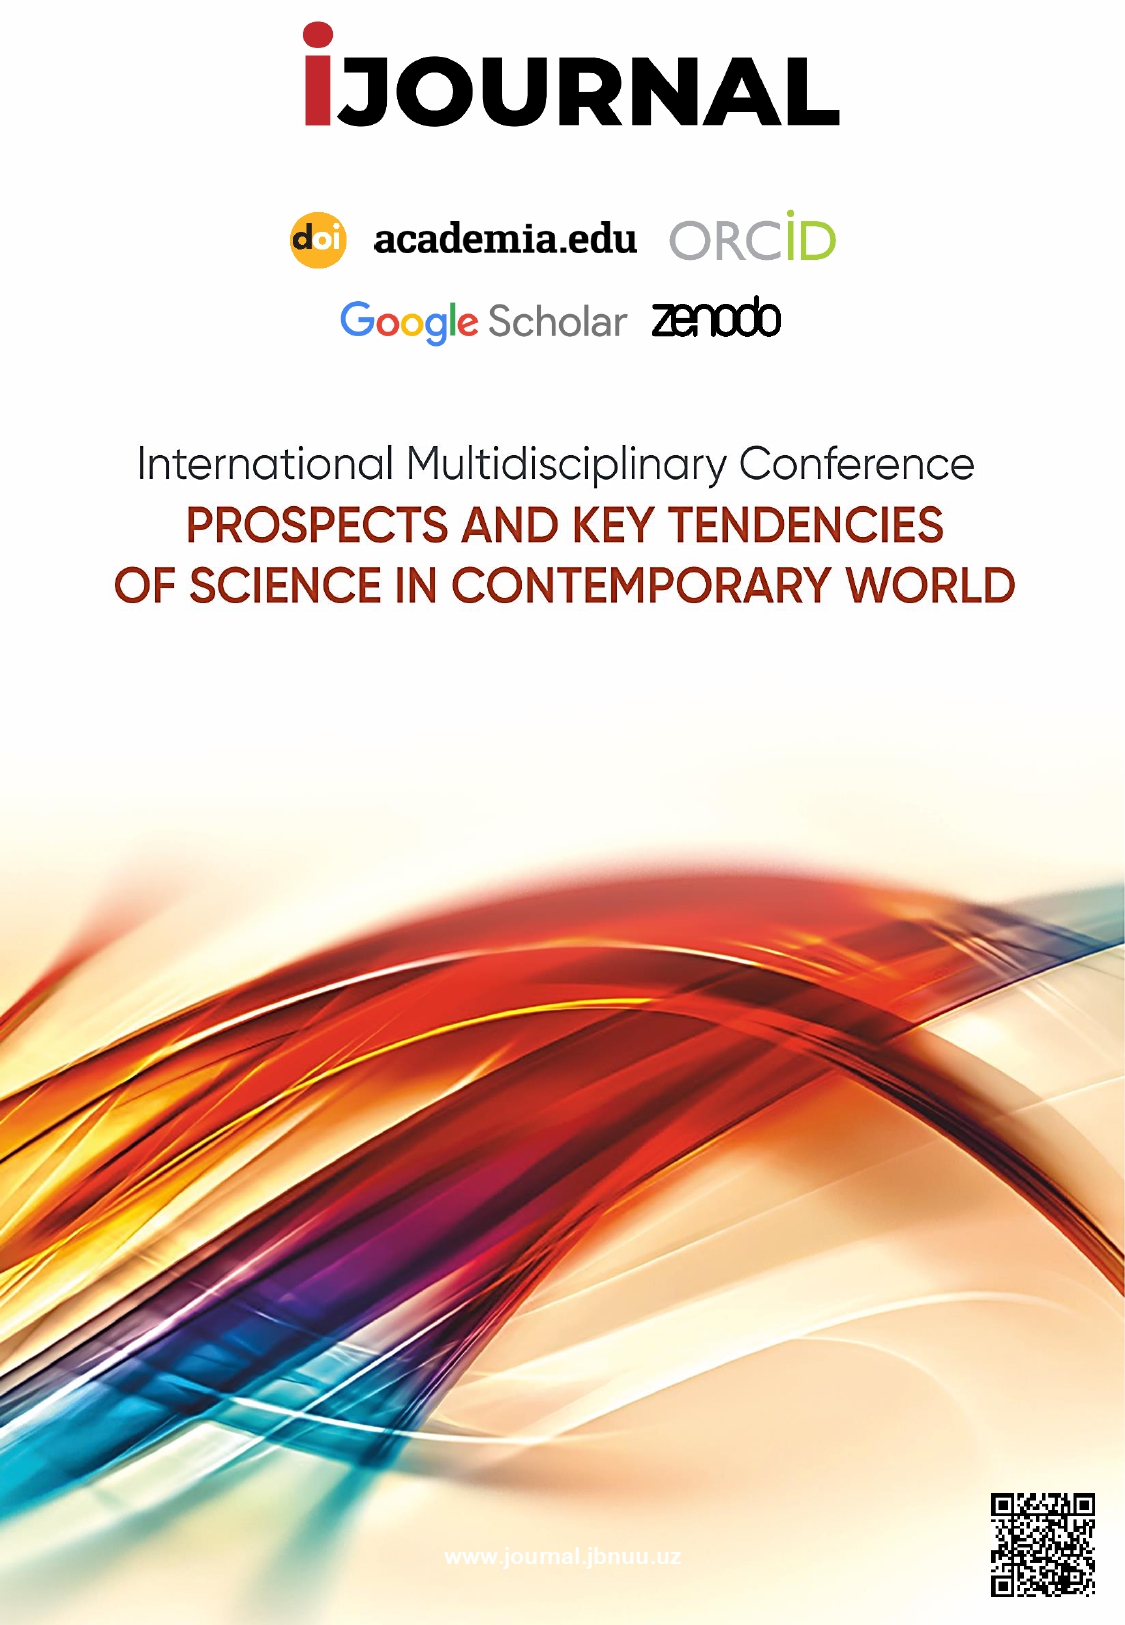 					View 2024: II International Multidisciplinary Conference “Prospects and Key Tendencies of Science in Contemporary World”
				